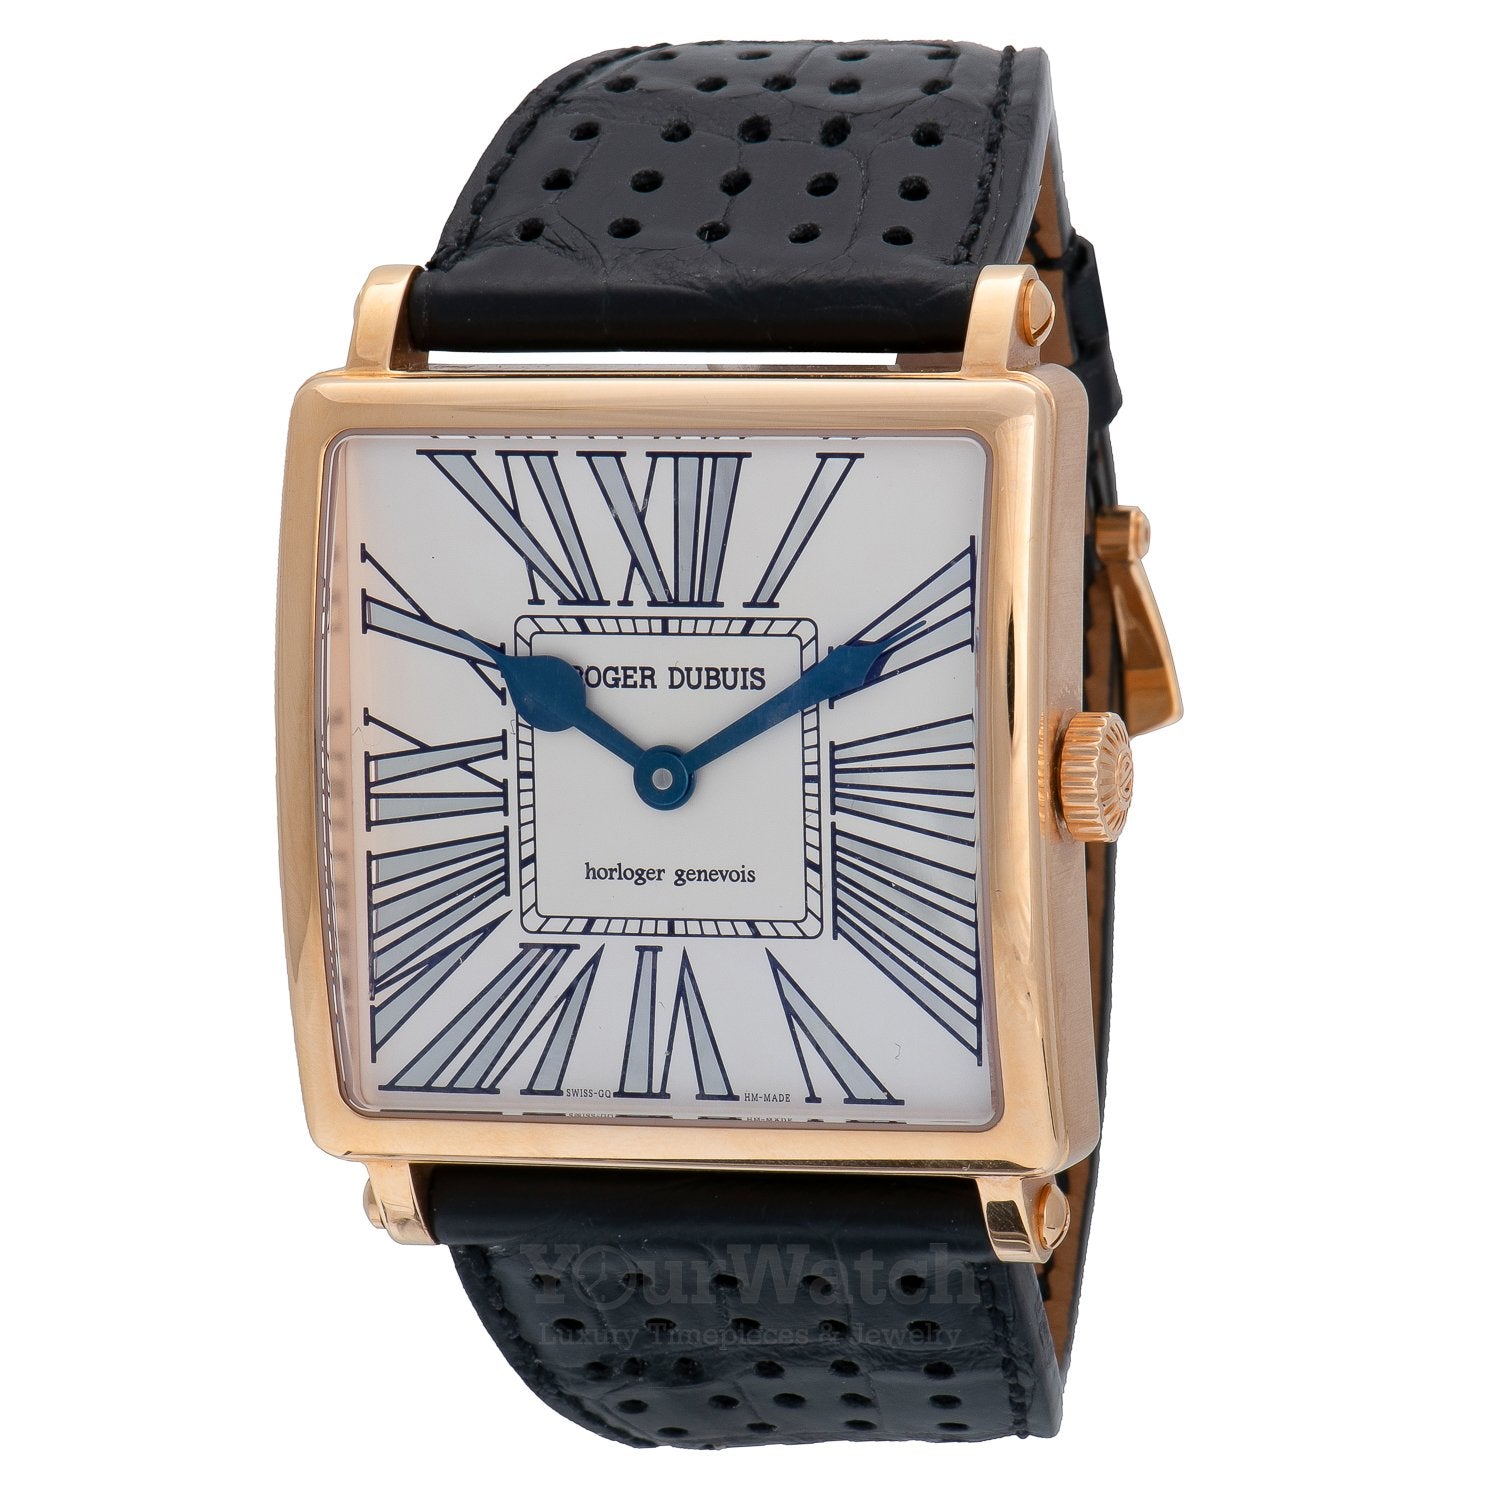 Roger Dubuis Golden Square Watch G431453-73